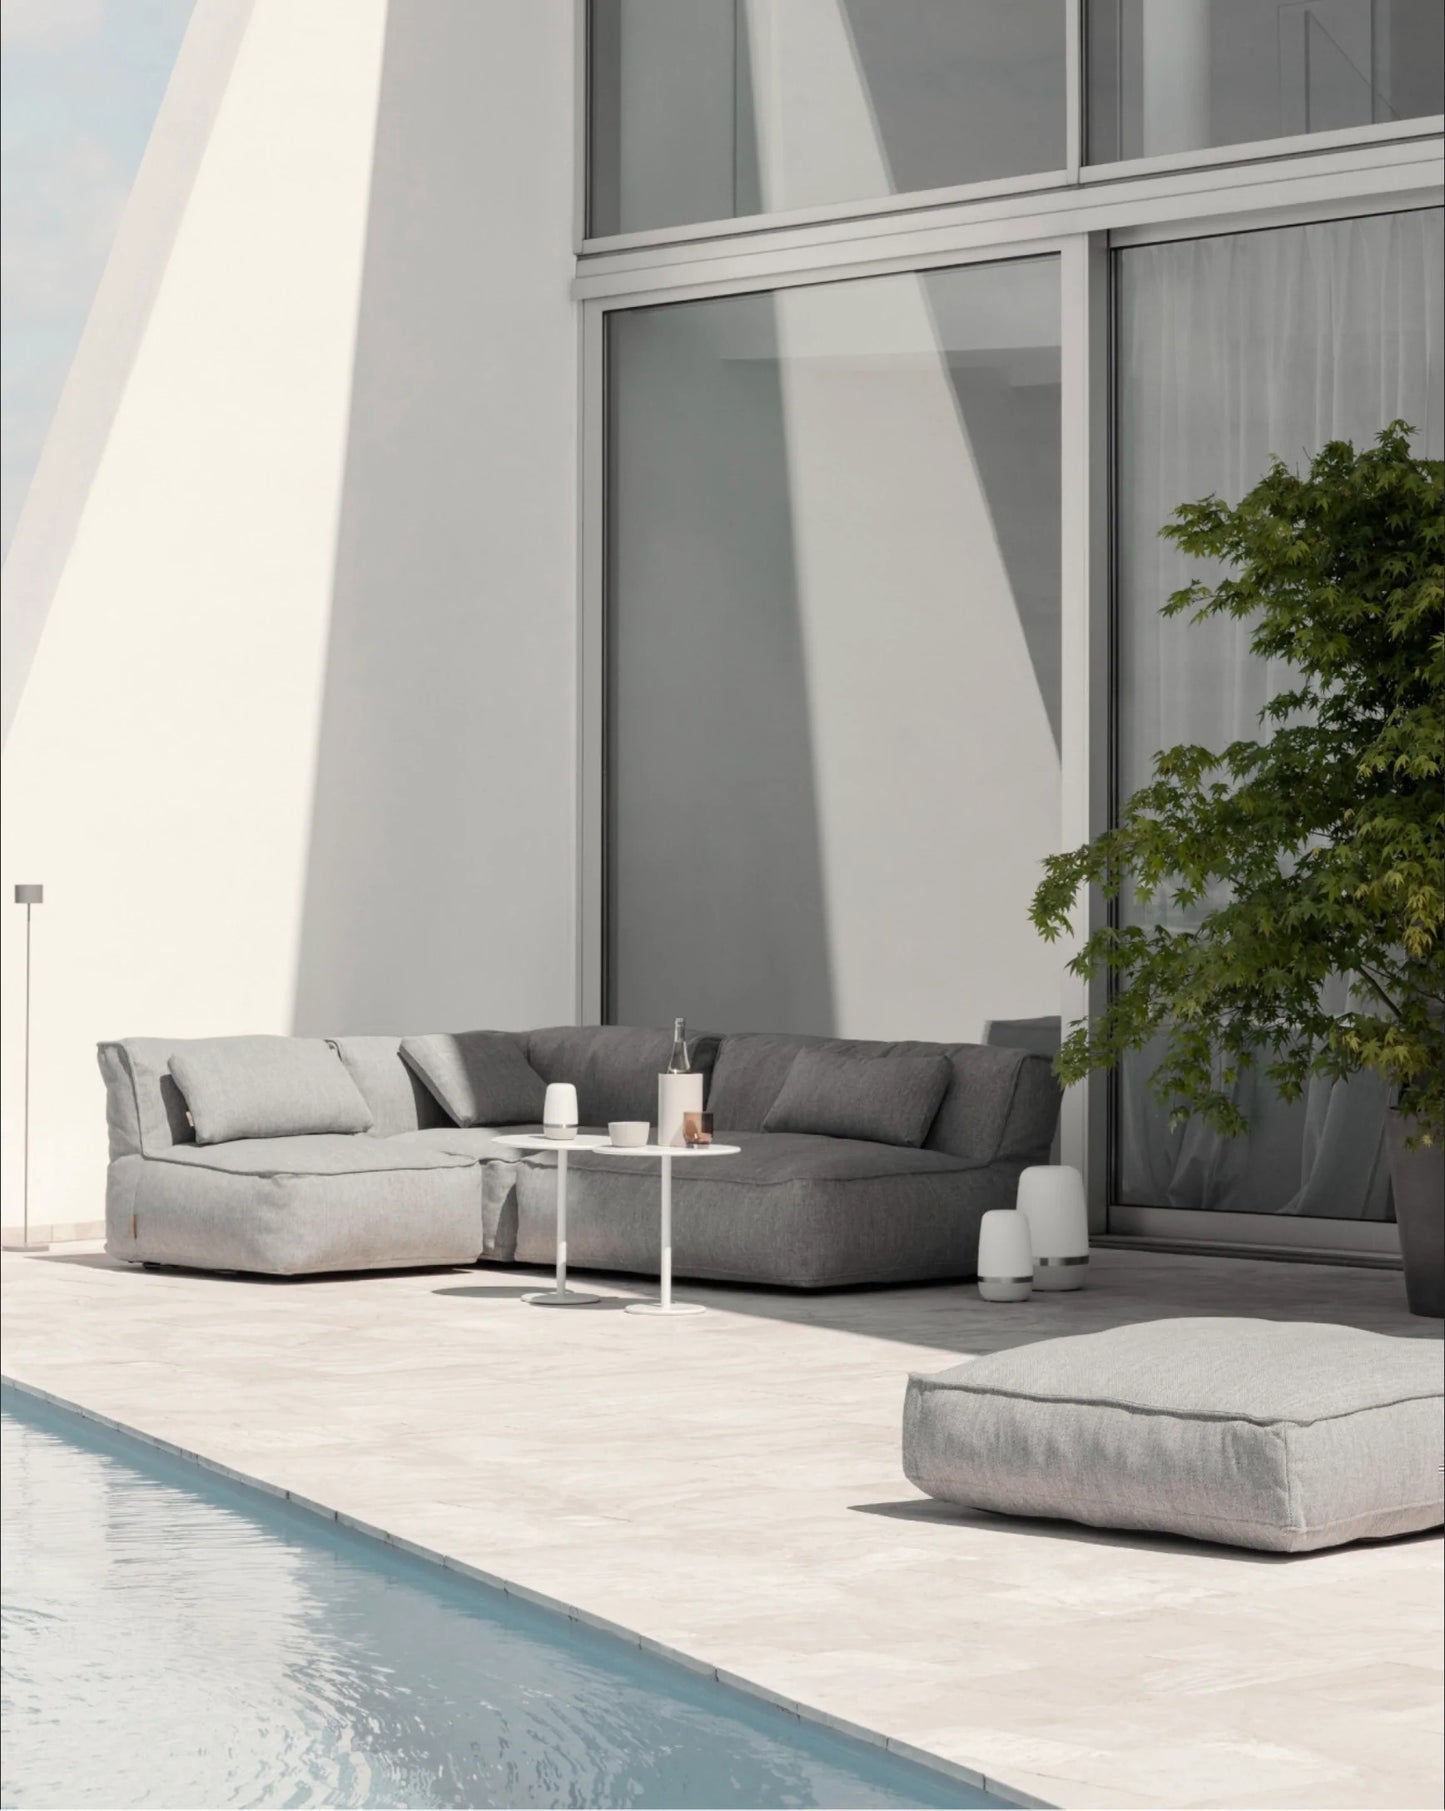 Blomus Grow Double Chaise Sectional Outdoor Patio Lounger Cloud 62065